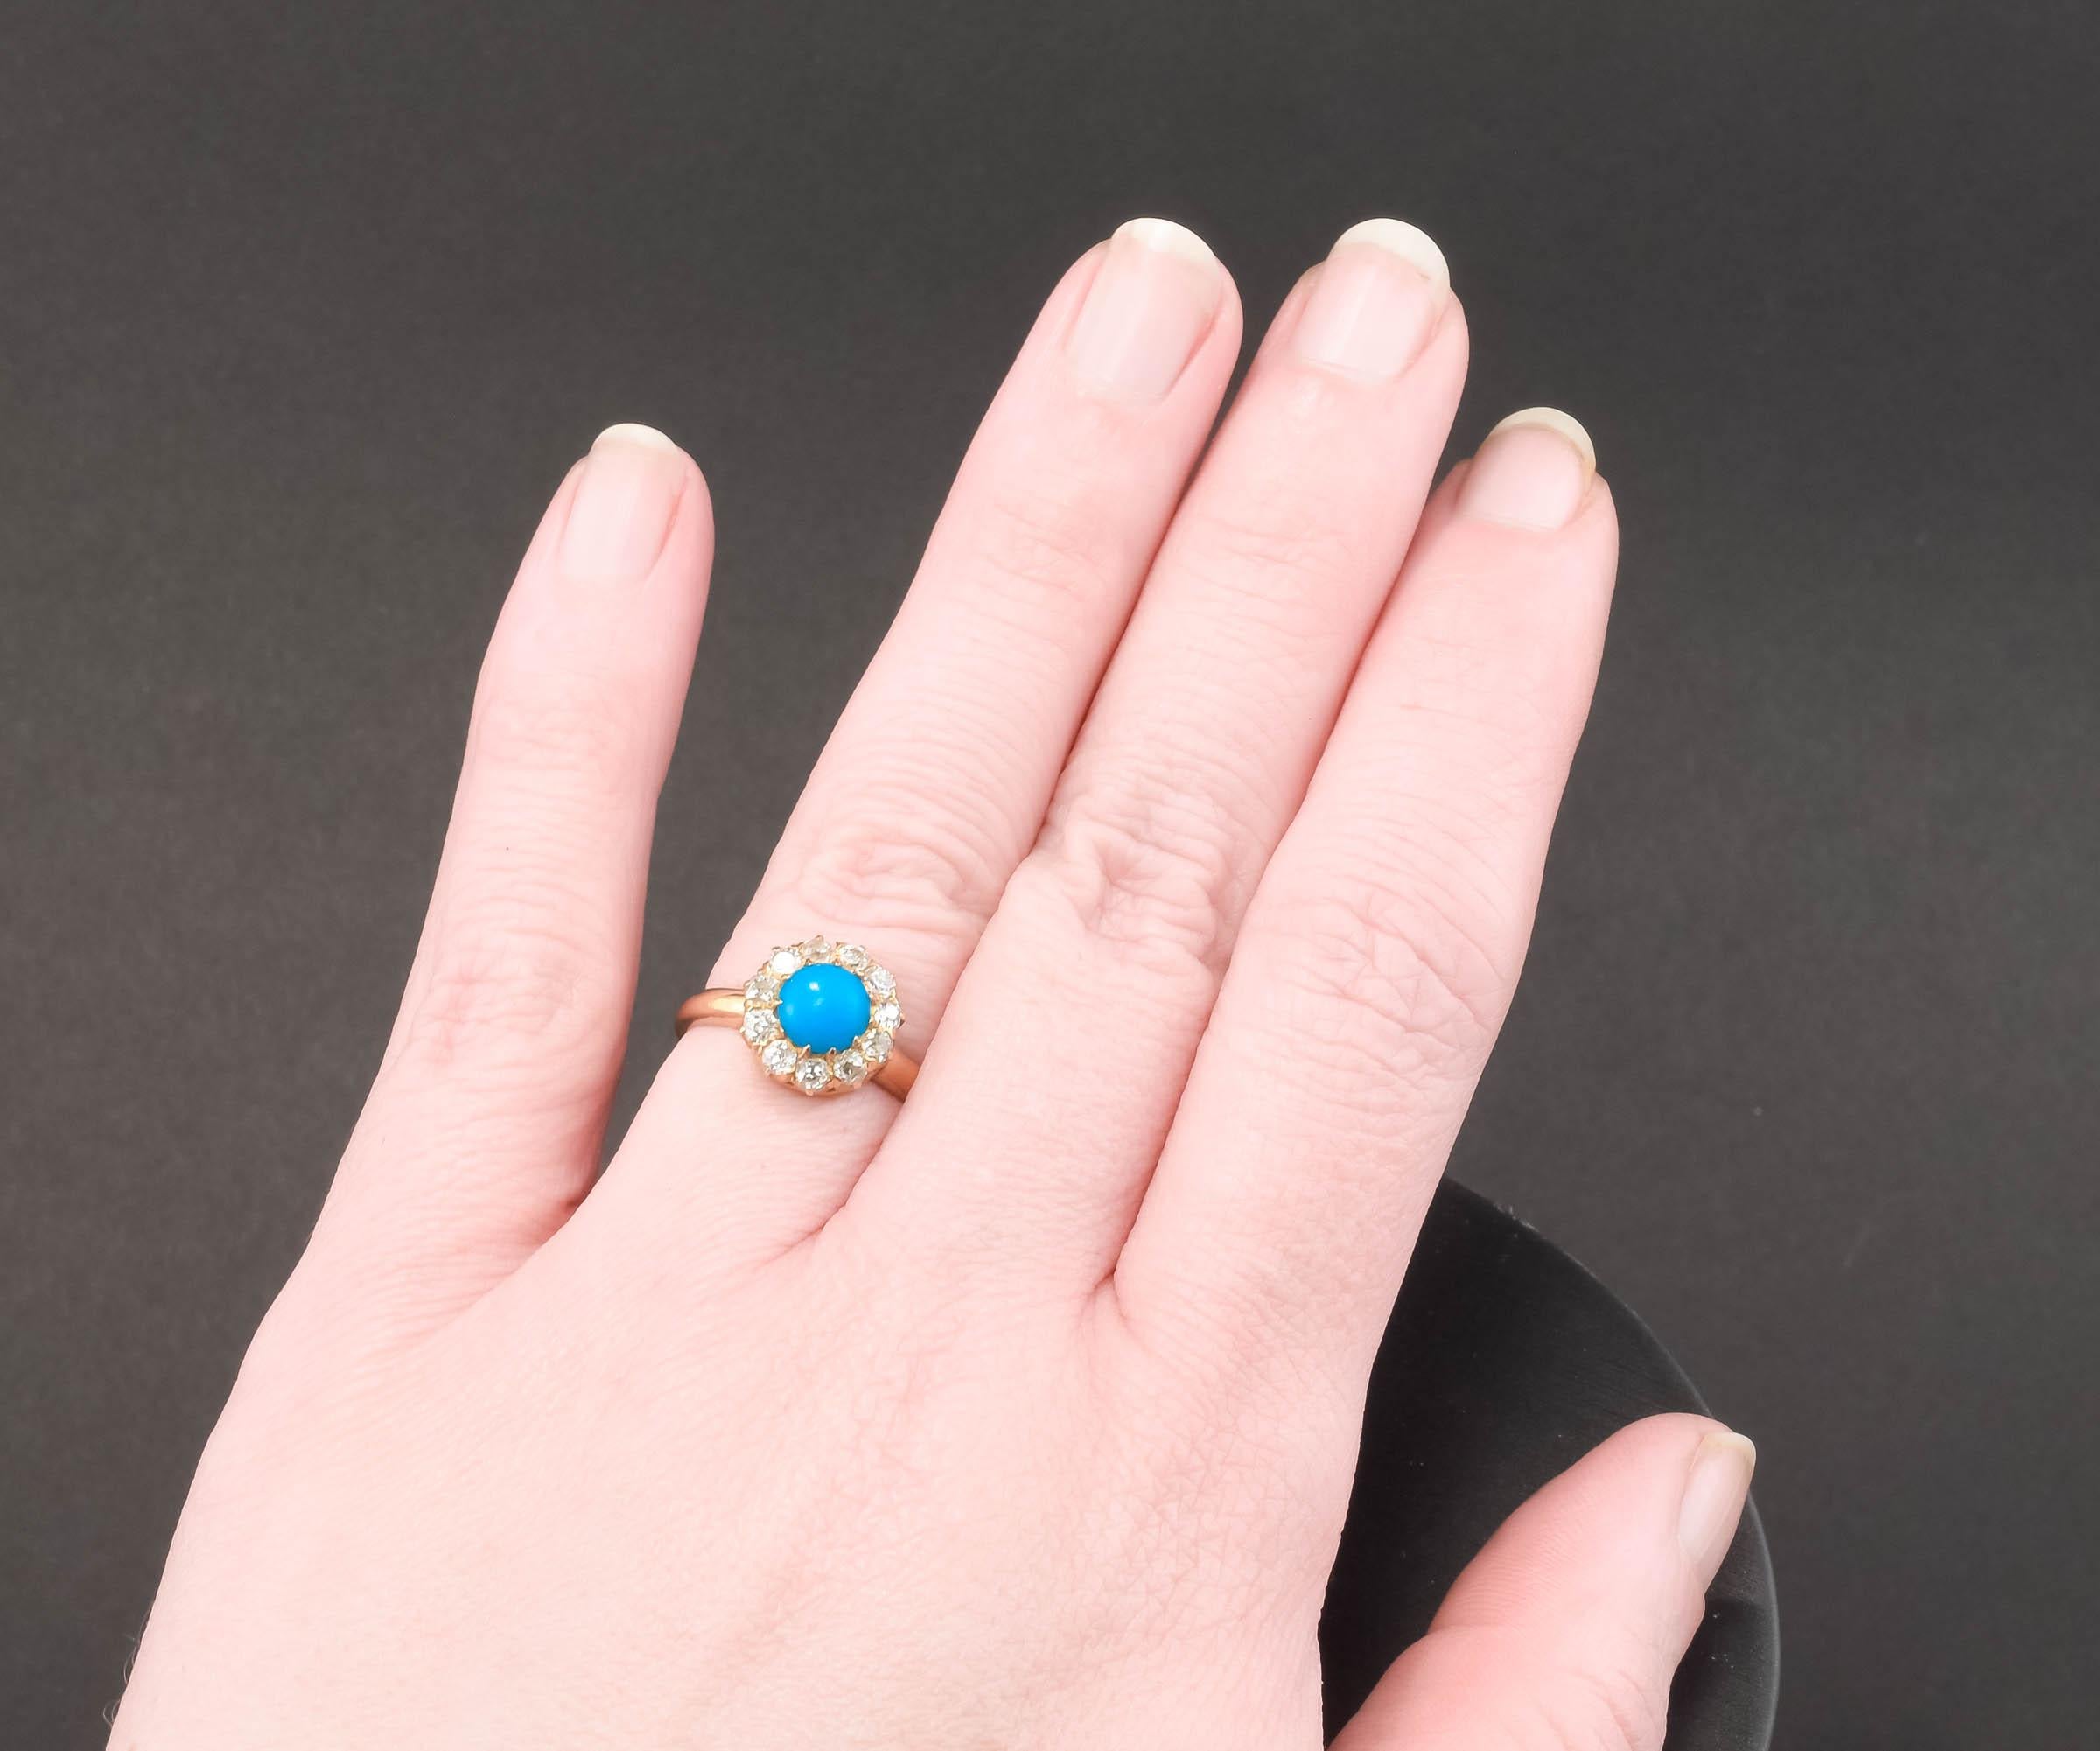 Women's Dainty Antique Turquoise Diamond Halo Ring with Fiery Old Mine Cut Diamonds For Sale